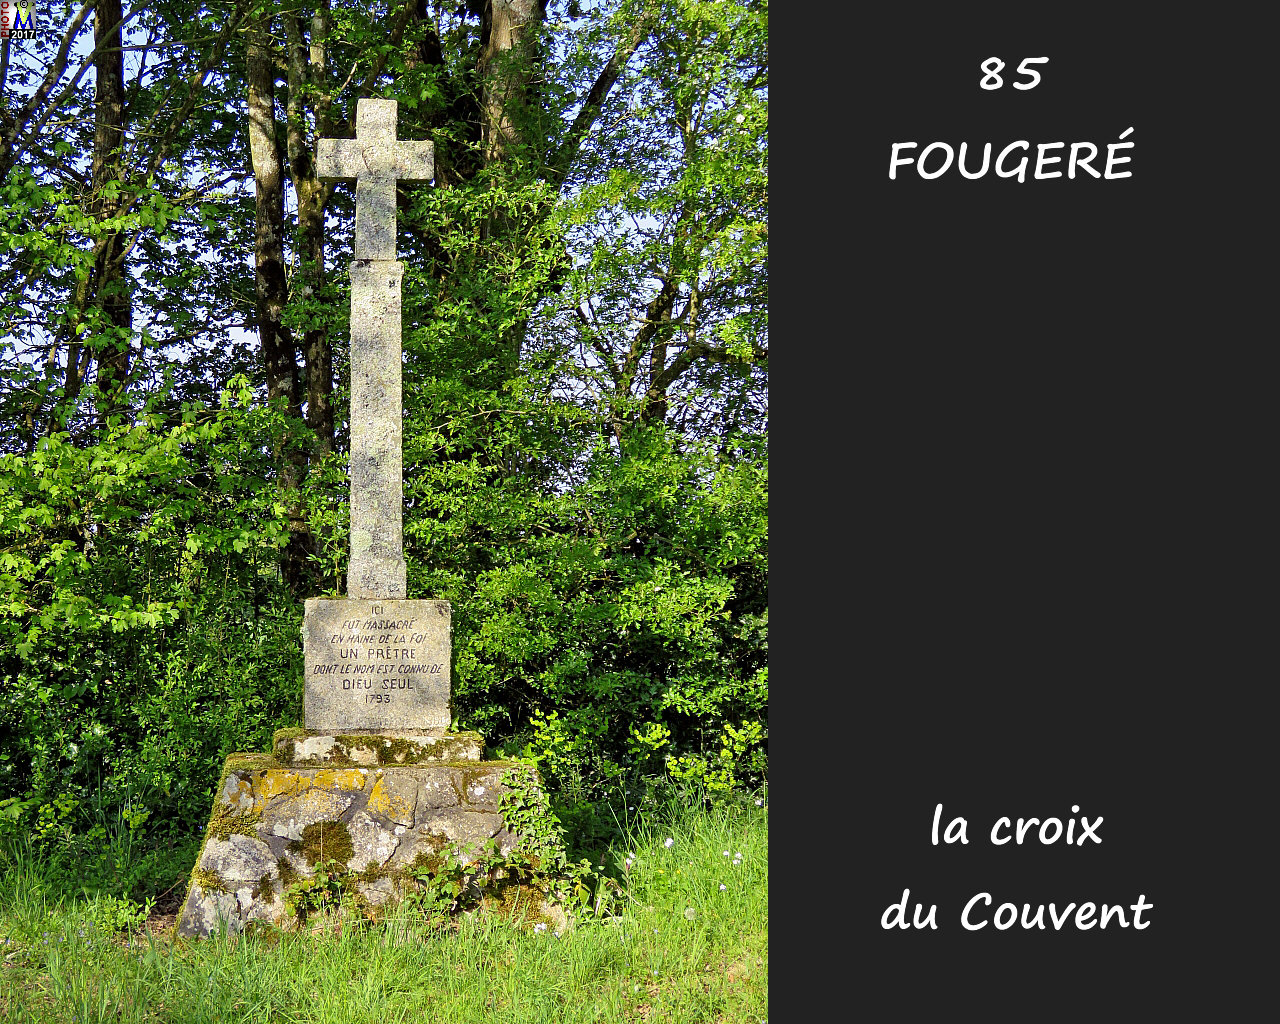 85FOUGERE_couvent_1000.jpg